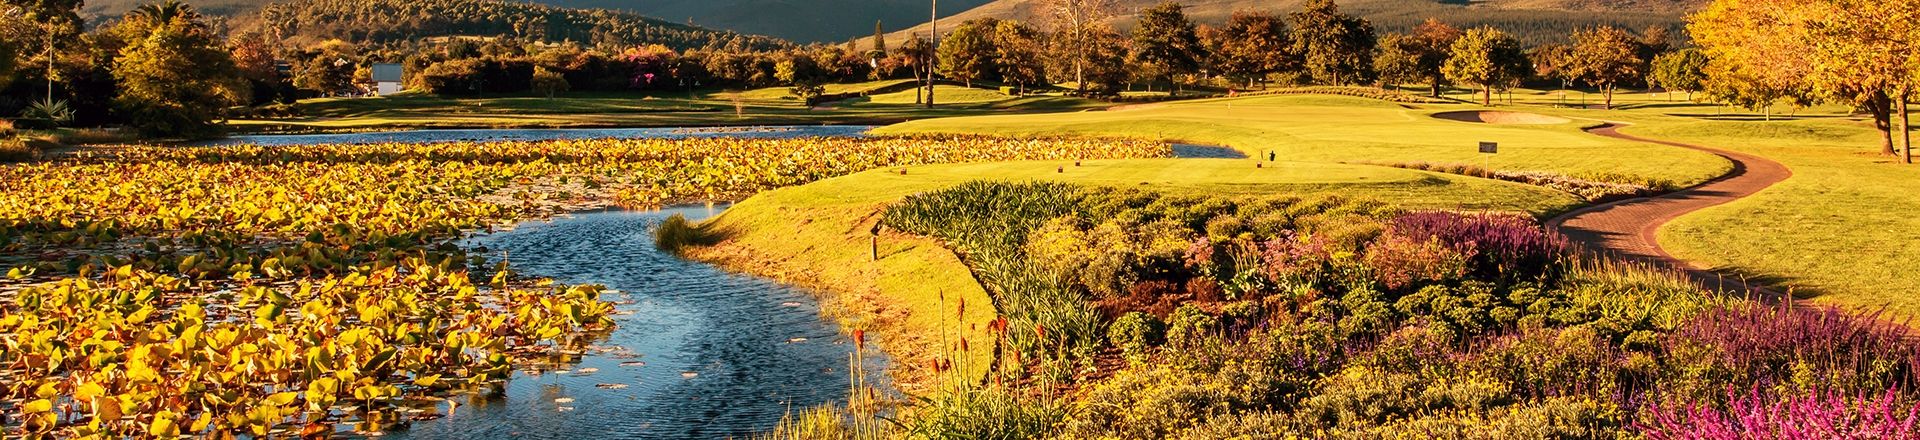 The Links golf course at Fancourt in South Africa